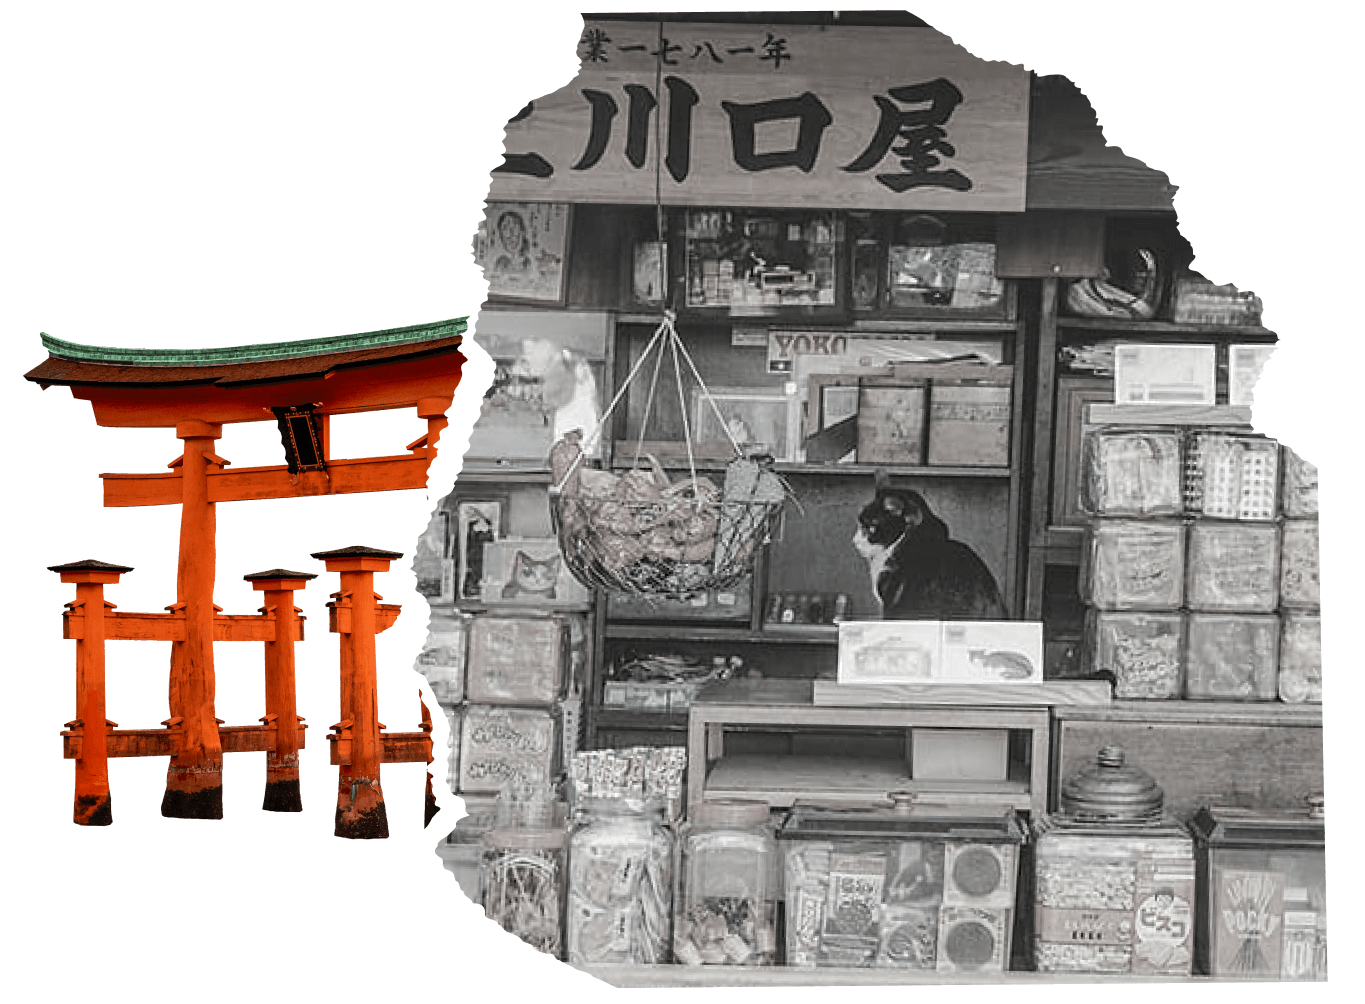 An old Japanese candy shop